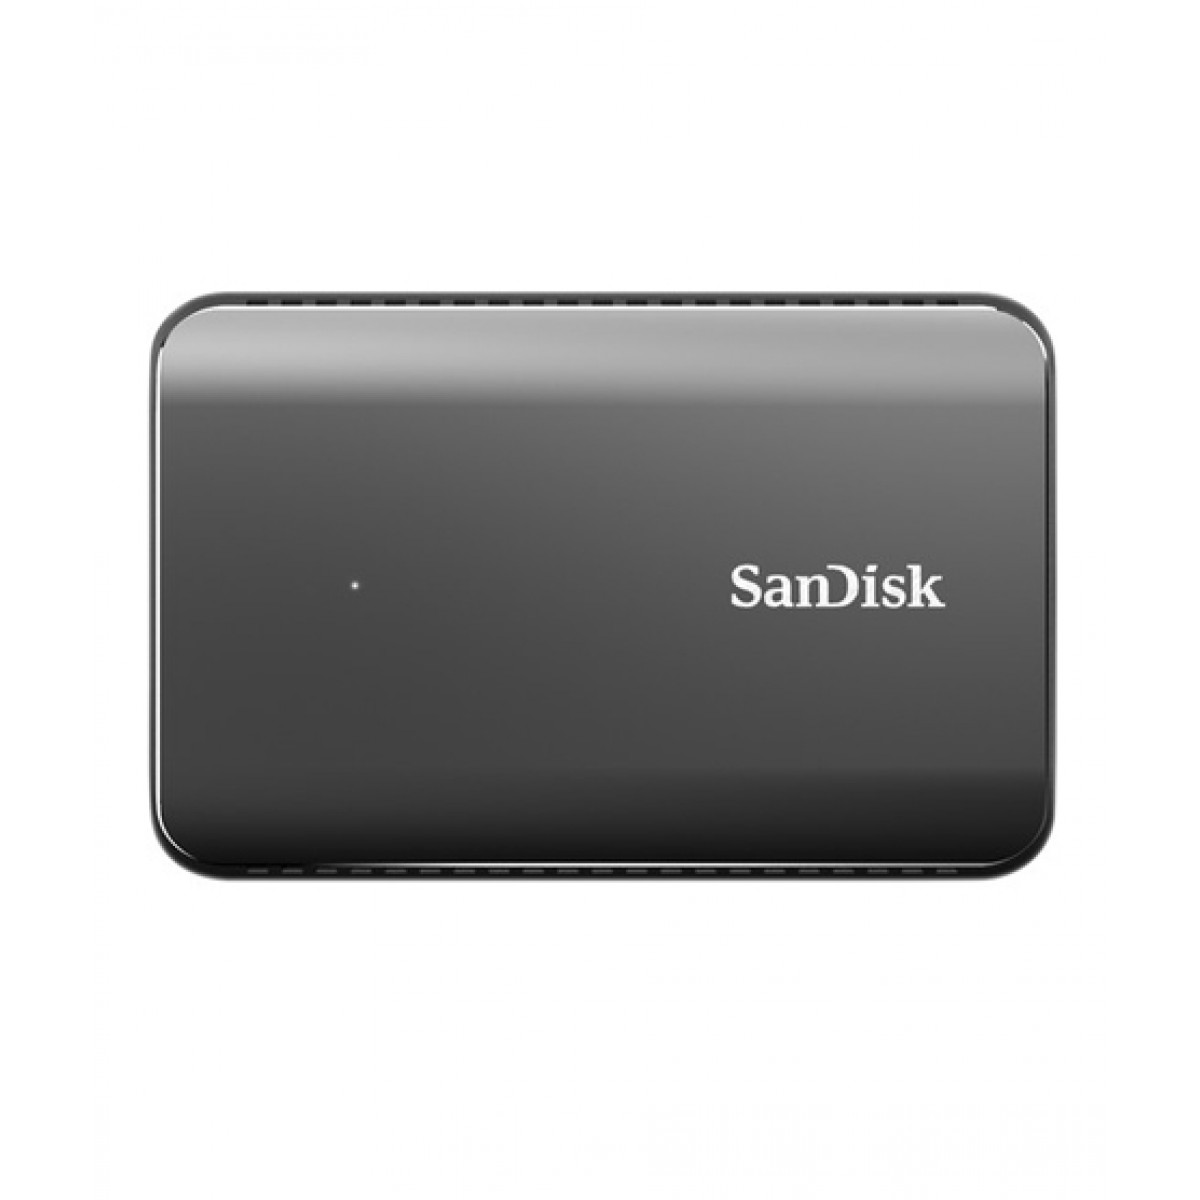 SanDisk Extreme 900 480GB Portable SSD